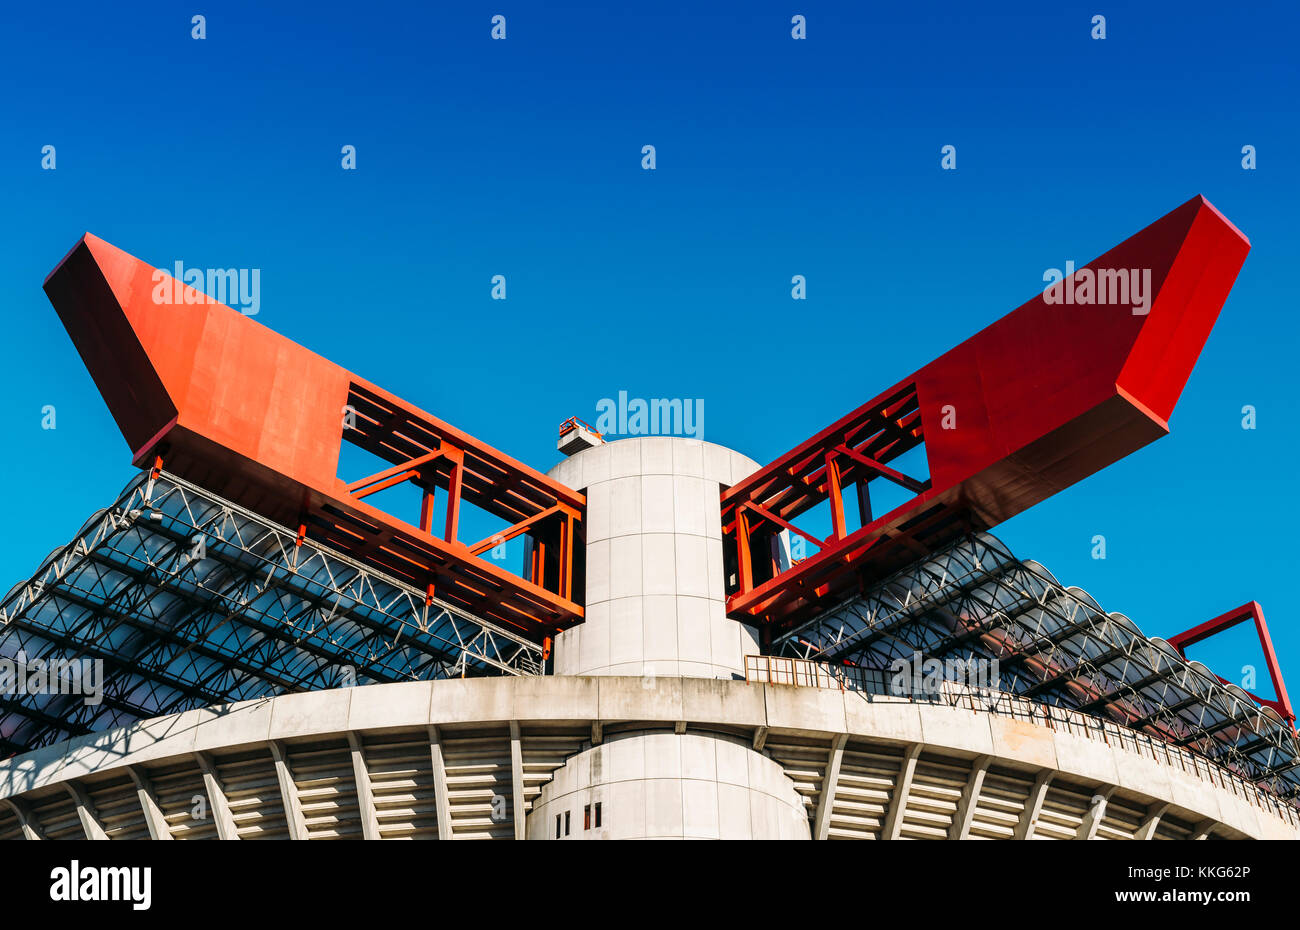 Milan, Italy - Nov 30, 2017: San Siro in Milan, Italy is a football / soccer stadium (capacity 80,018) which is home to both A.C Milan and Inter Milan Stock Photo